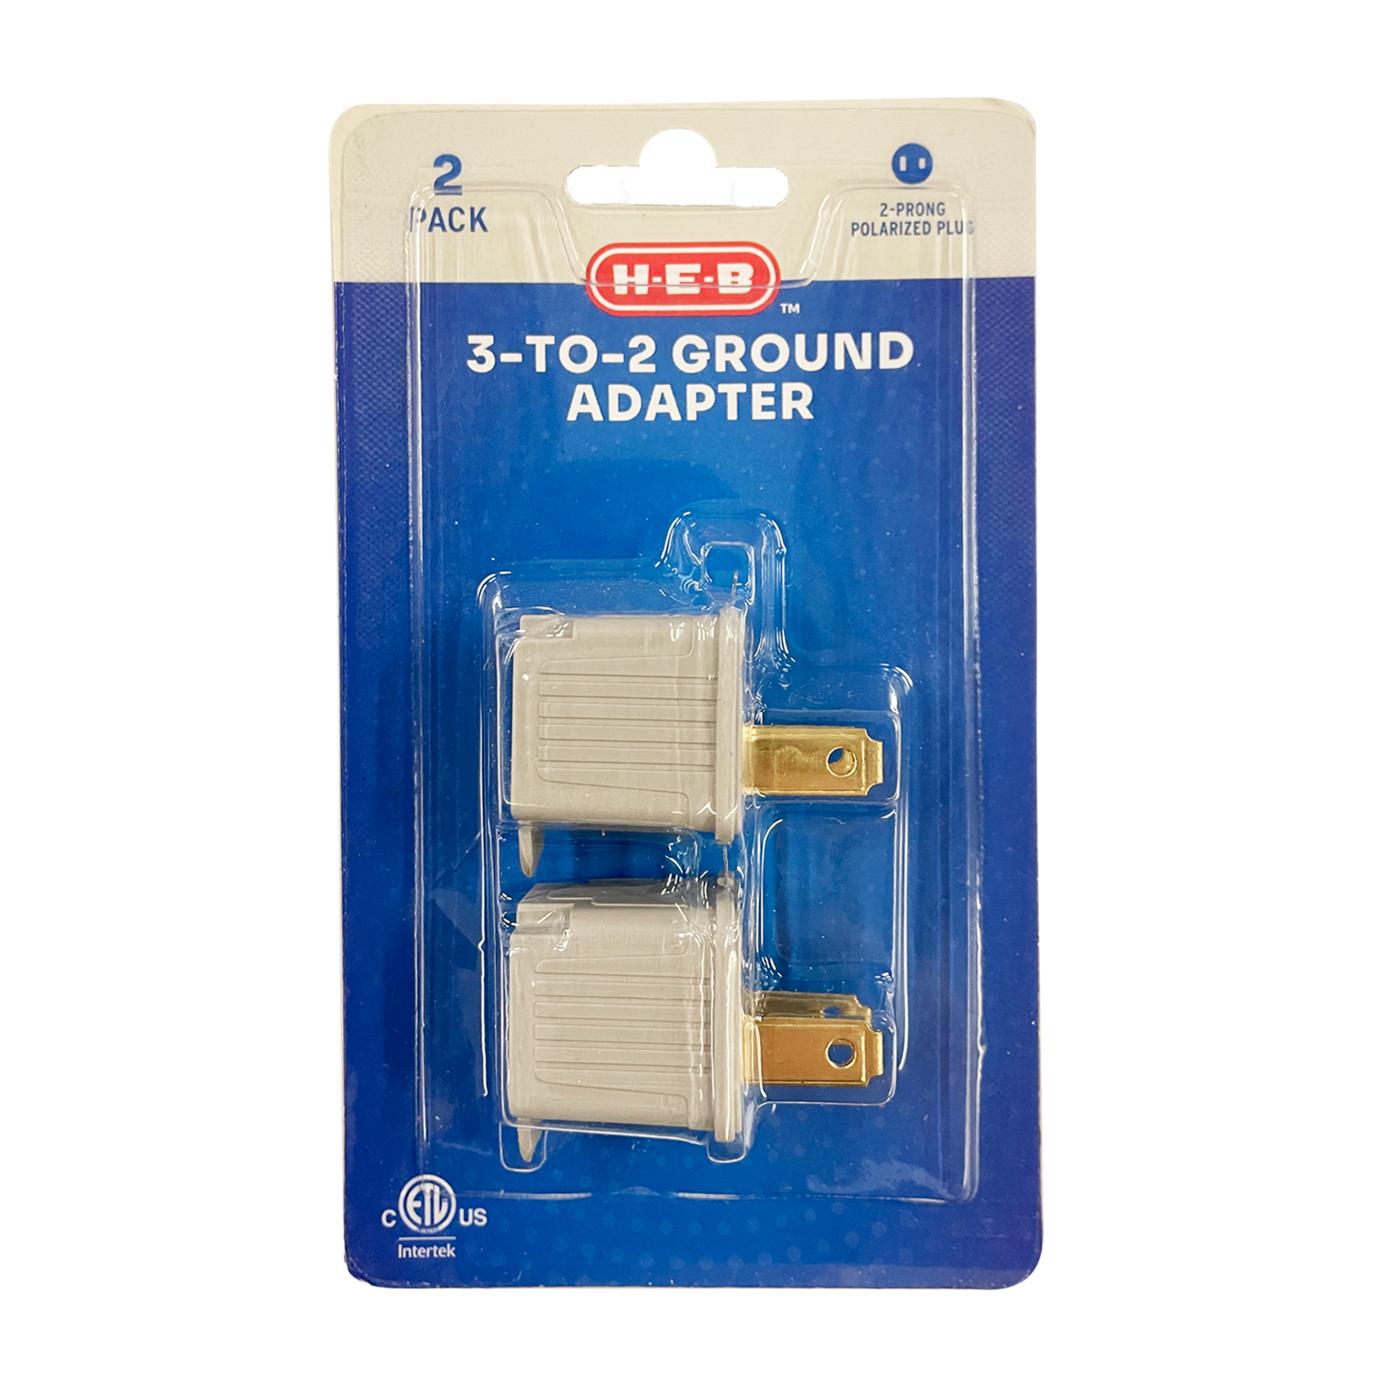 H-E-B 3 to 2 Grounded Adapters; image 1 of 2